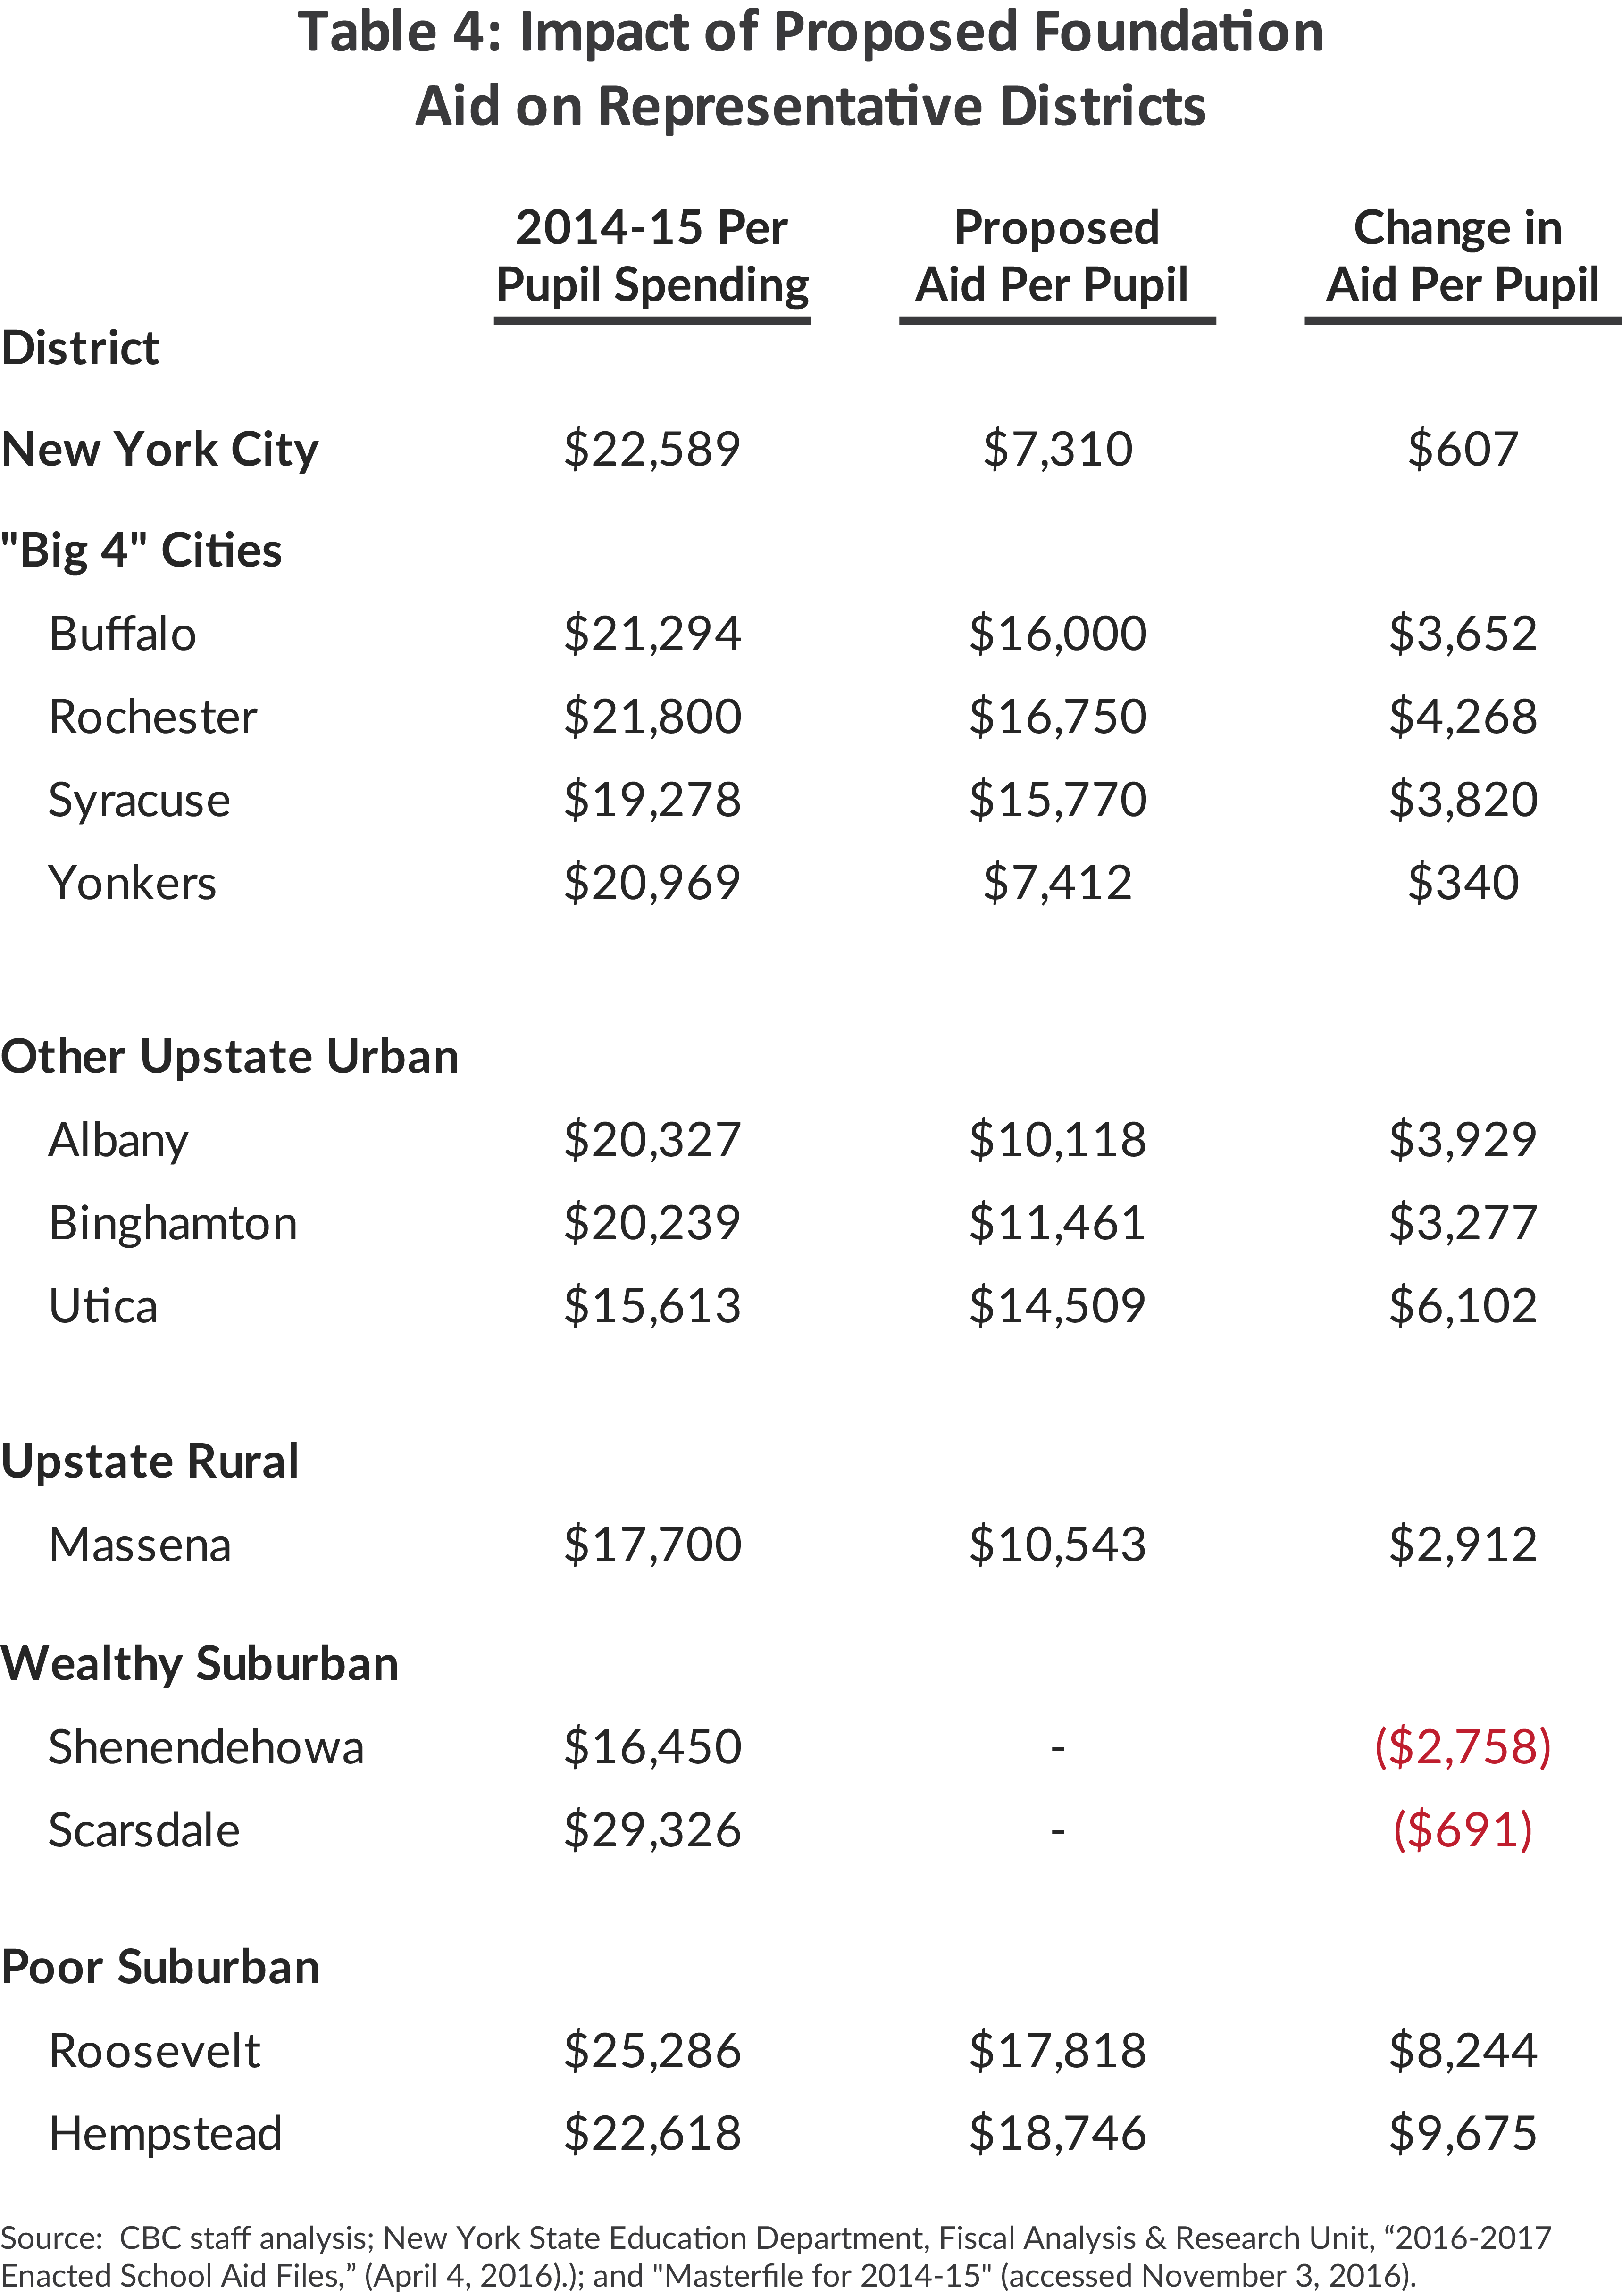 Proposed Foundation Aid Change on NYC, "Big 4" and Other School Districts